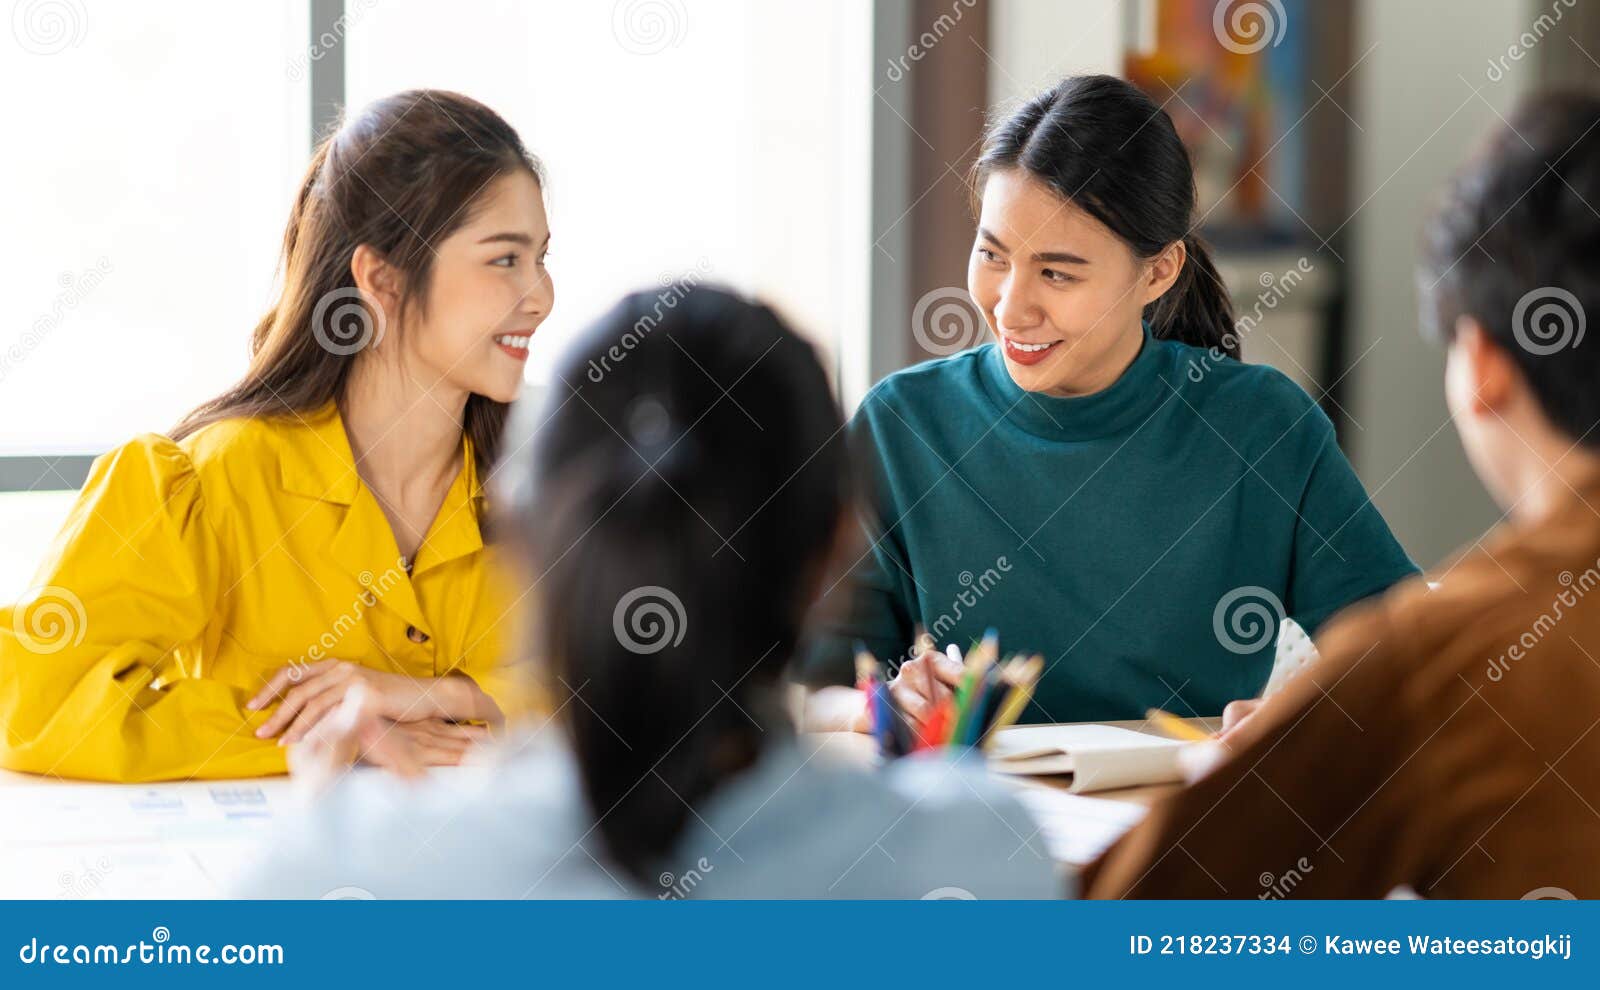 group of young asian business people or creative team in brainstorm discussion meeting in office. female coworker lead team talk